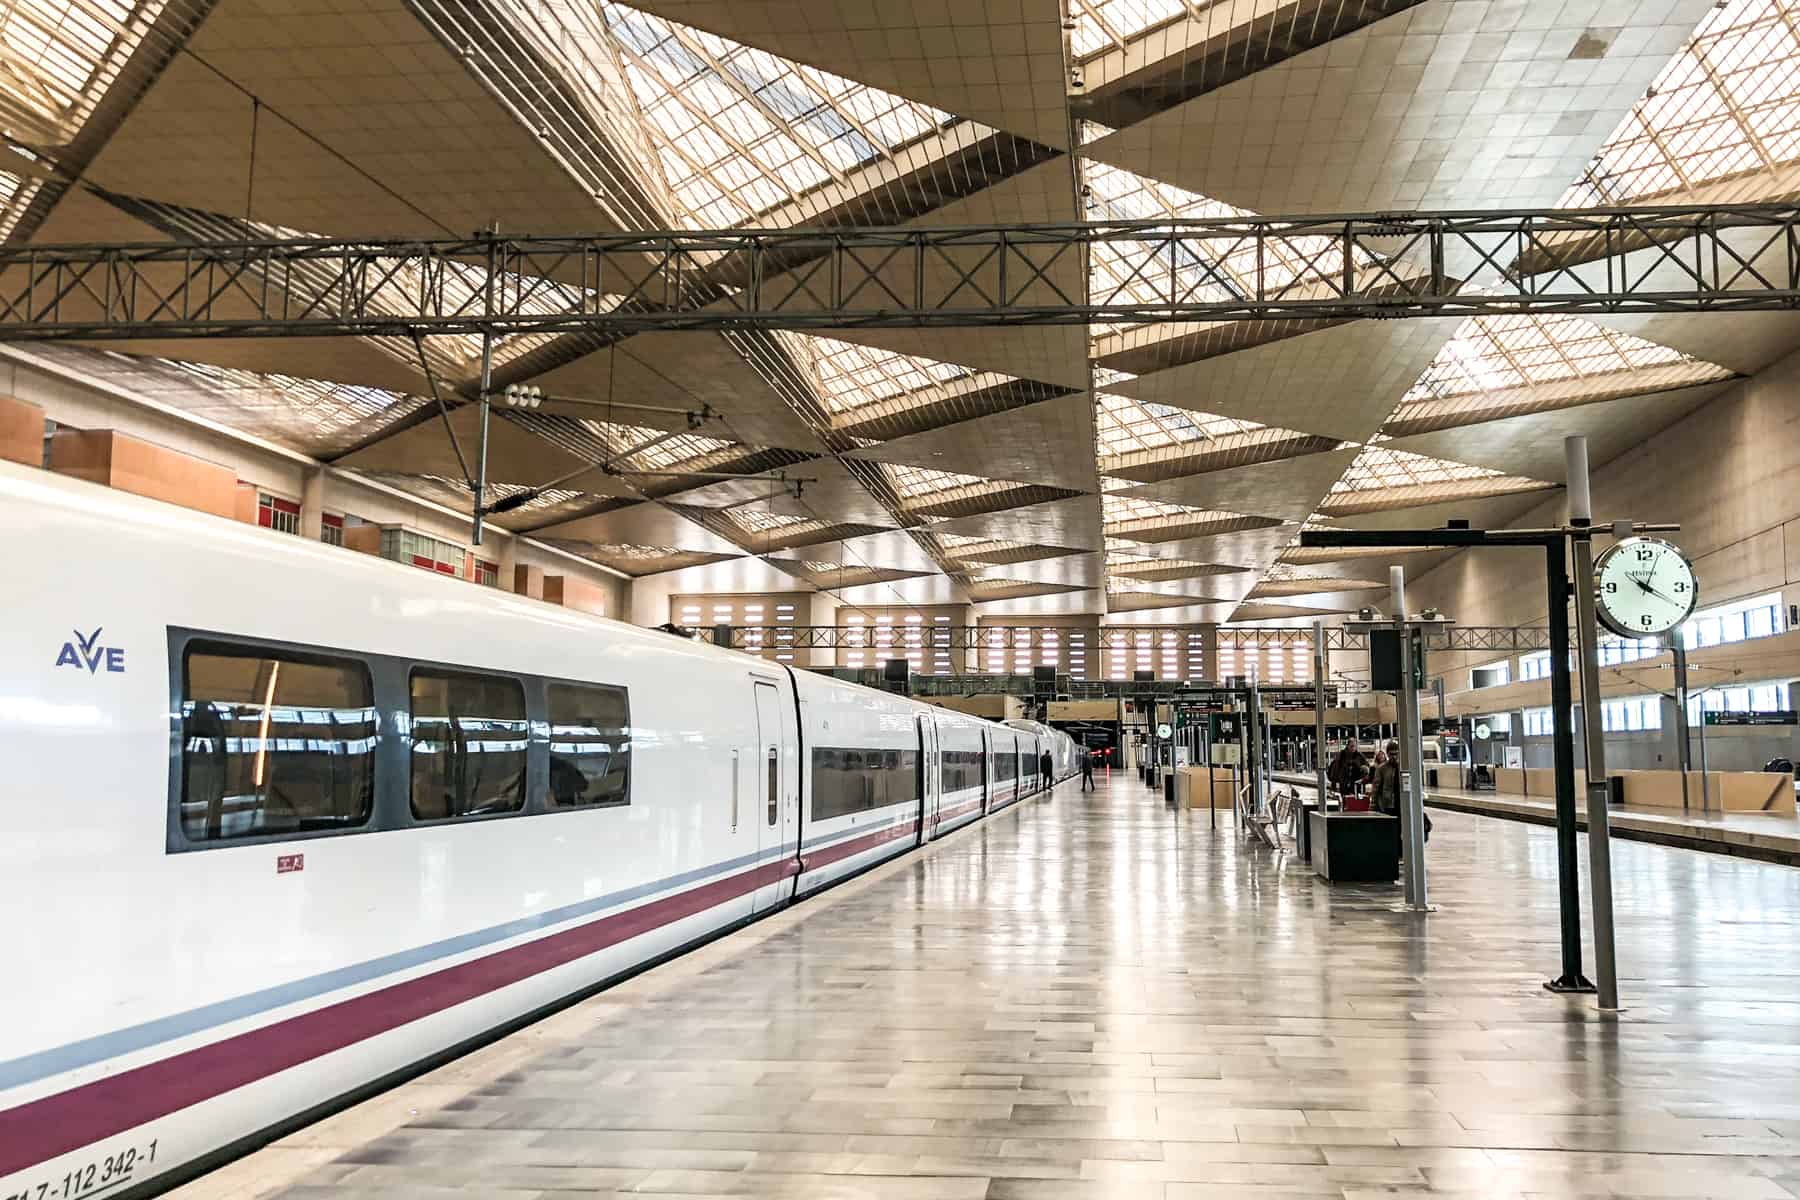 A long, white train with maroon and blue stripes and the letters 'Ave' stands at a modern train platform in Spain. 